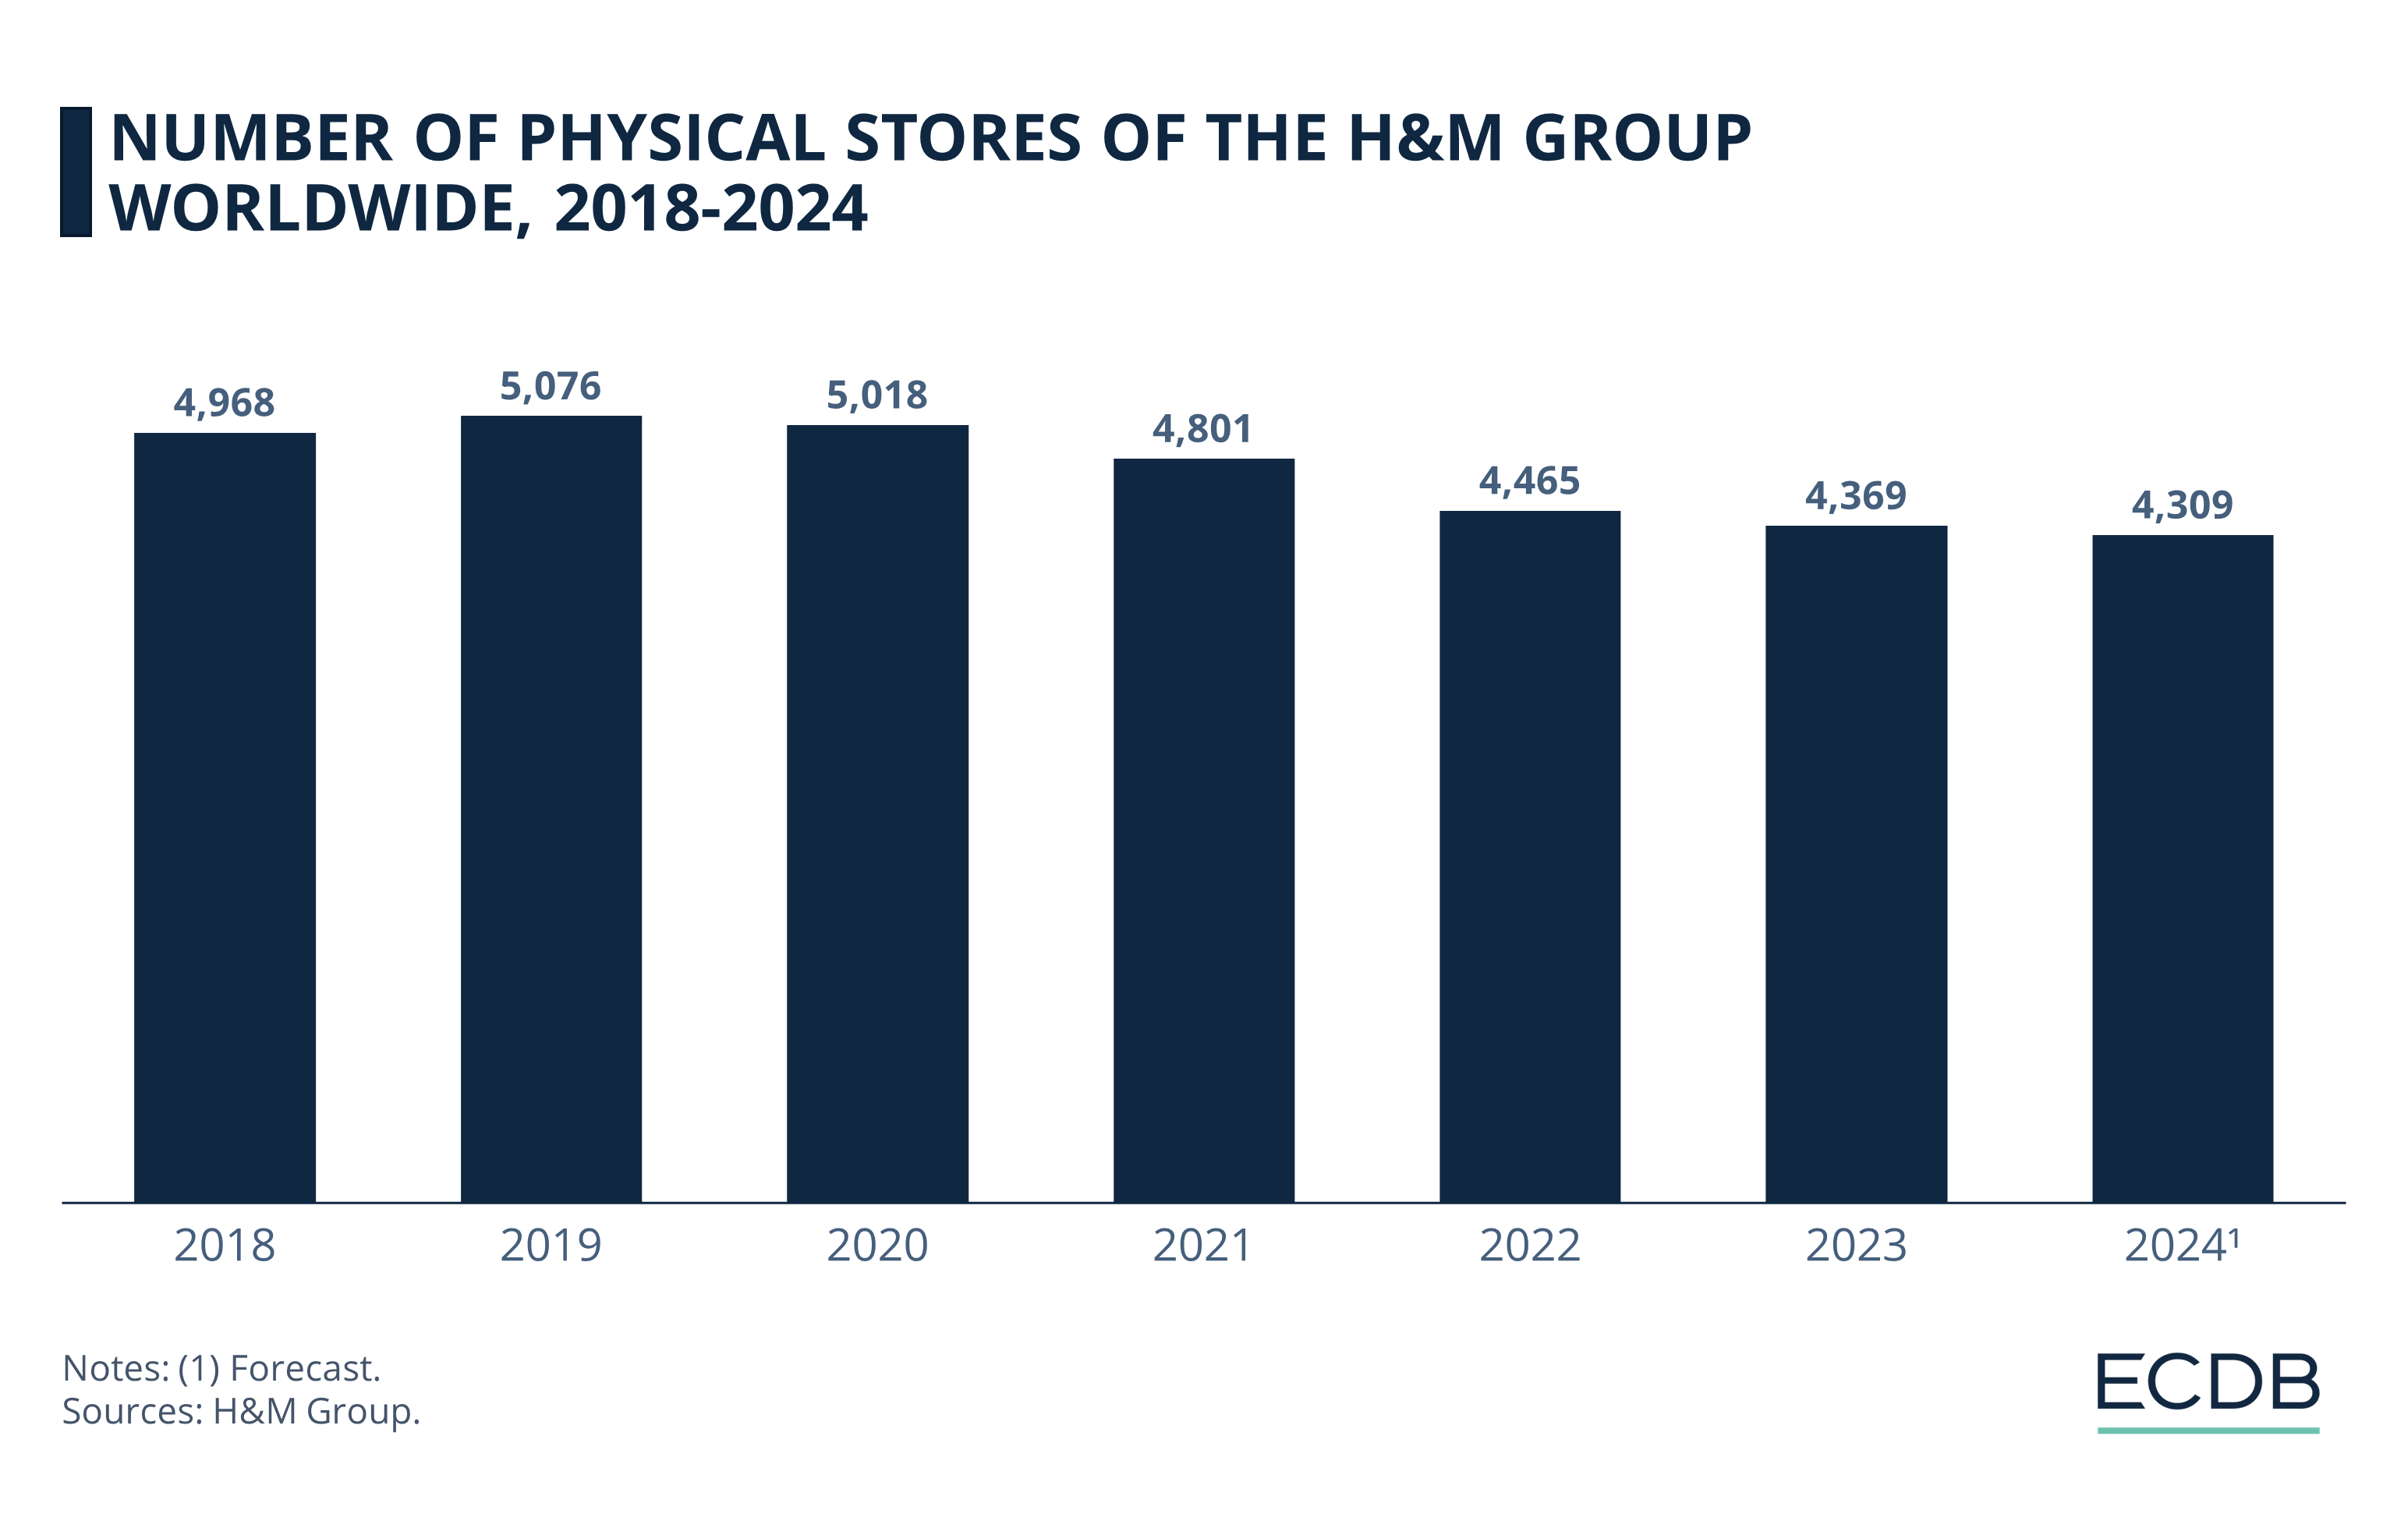 Number of Physical Stores of the H&M Group Worldwide, 2018-2024